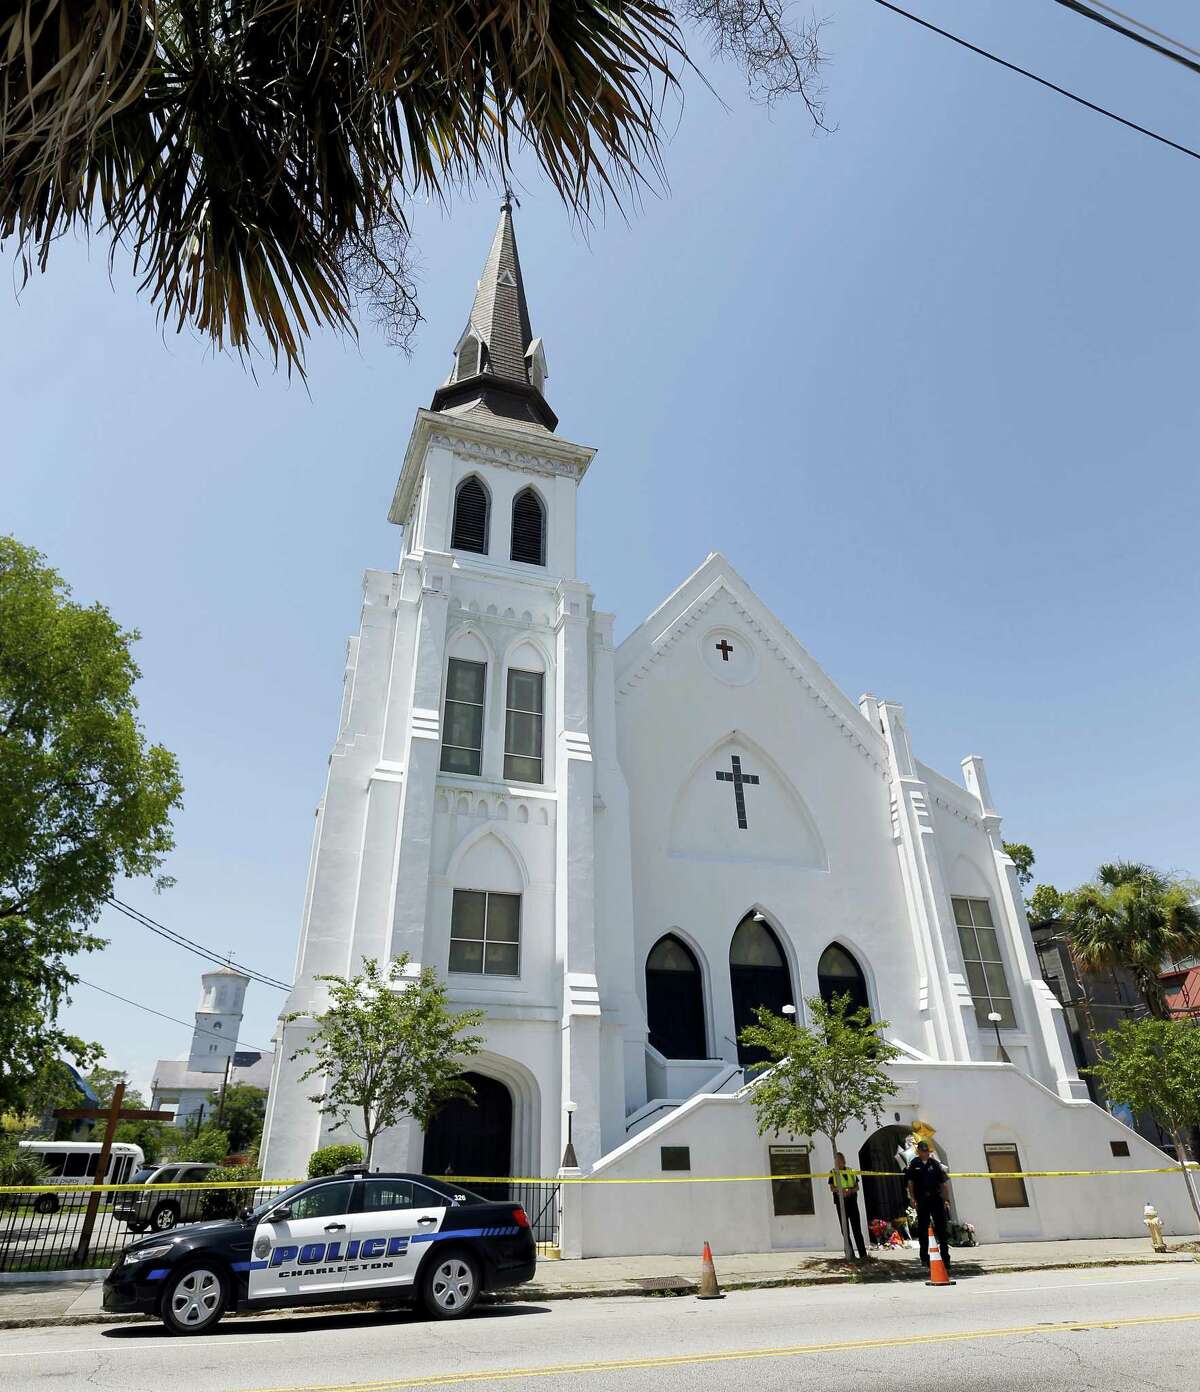 In this June 18, 2015, file photo, two Charleston police officers stand in front of the Emanuel AME Church in Charleston, S.C. The trial for Dylann Roof, a white man accused of killing nine black people at the church, started Wednesday, Dec. 7, 2016, at the federal courthouse in Charleston, SC.